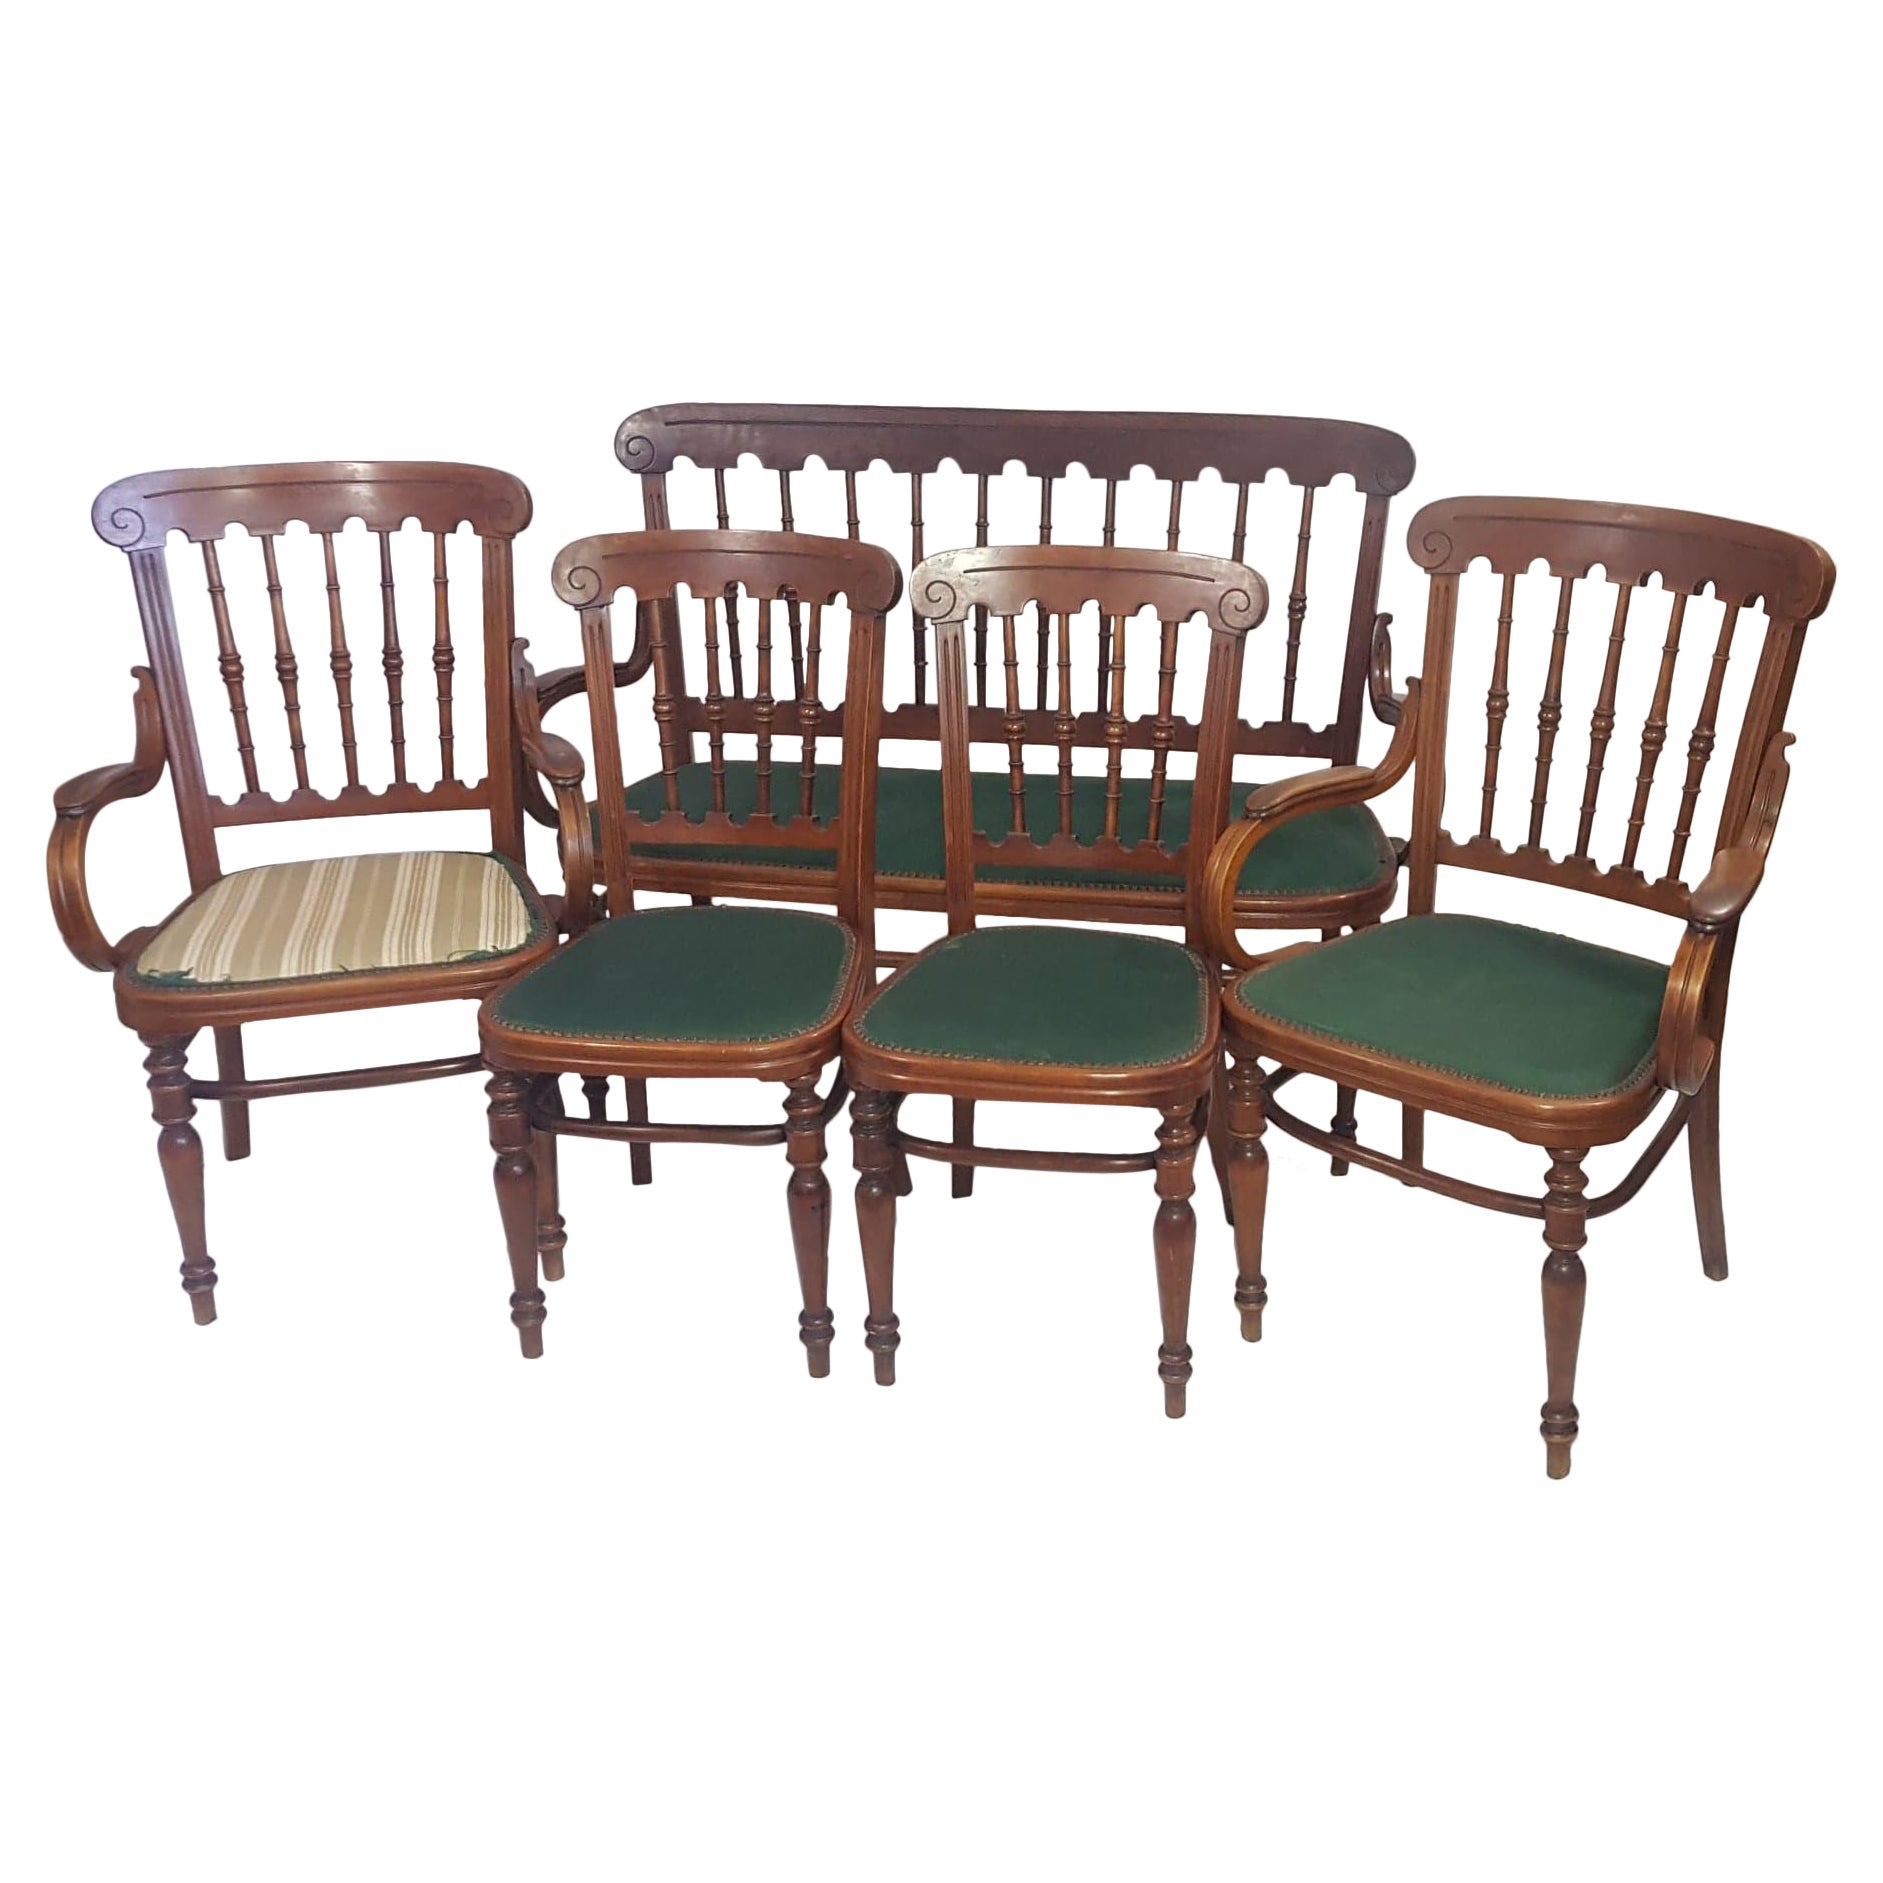 Living room Set Chairs Armchairs and bench For Sale